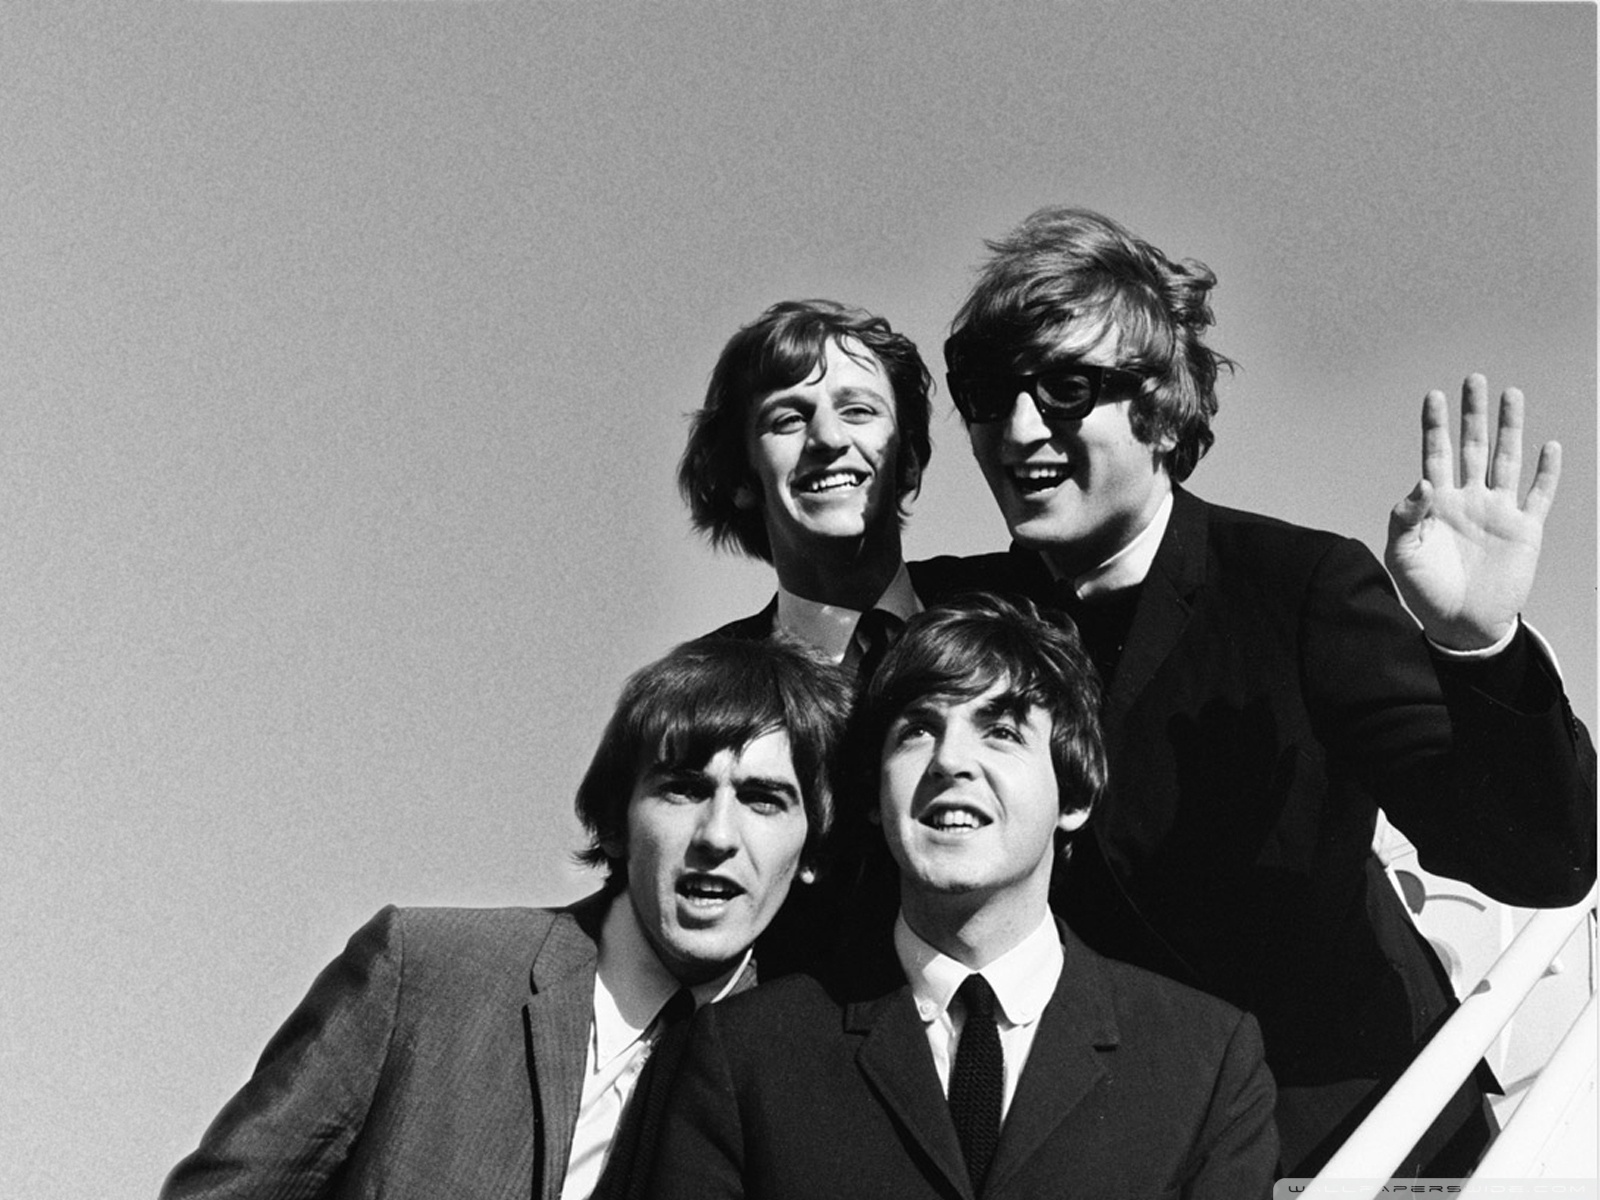 The Beatles download high definition